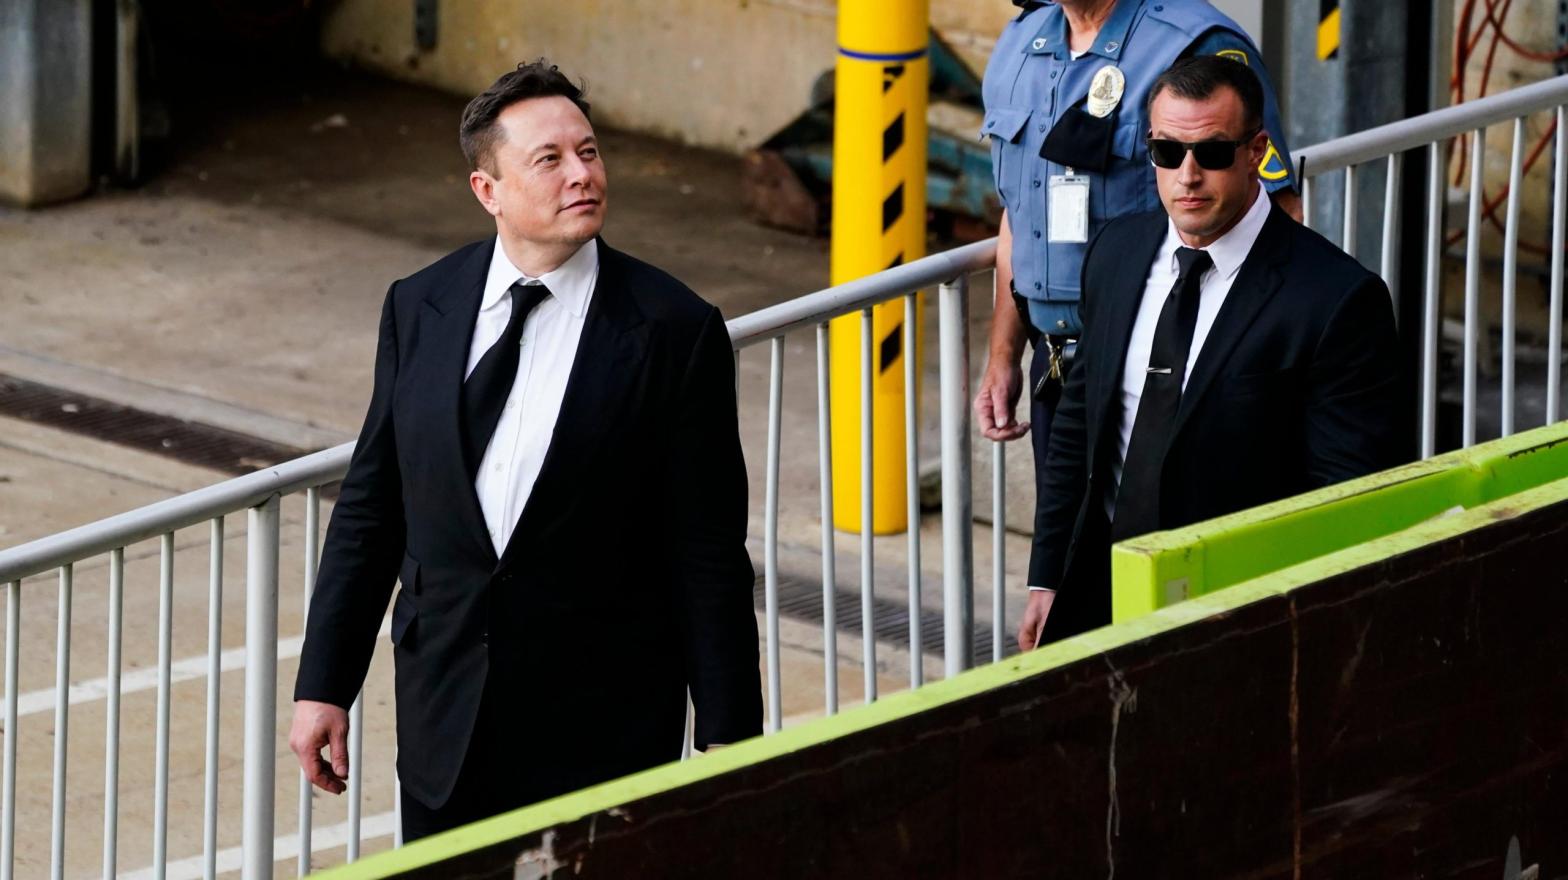 File photo of Elon Musk walking from the the justice centre in Wilmington, Del., on July 12, 2021. (Photo: Matt Rourke, AP)